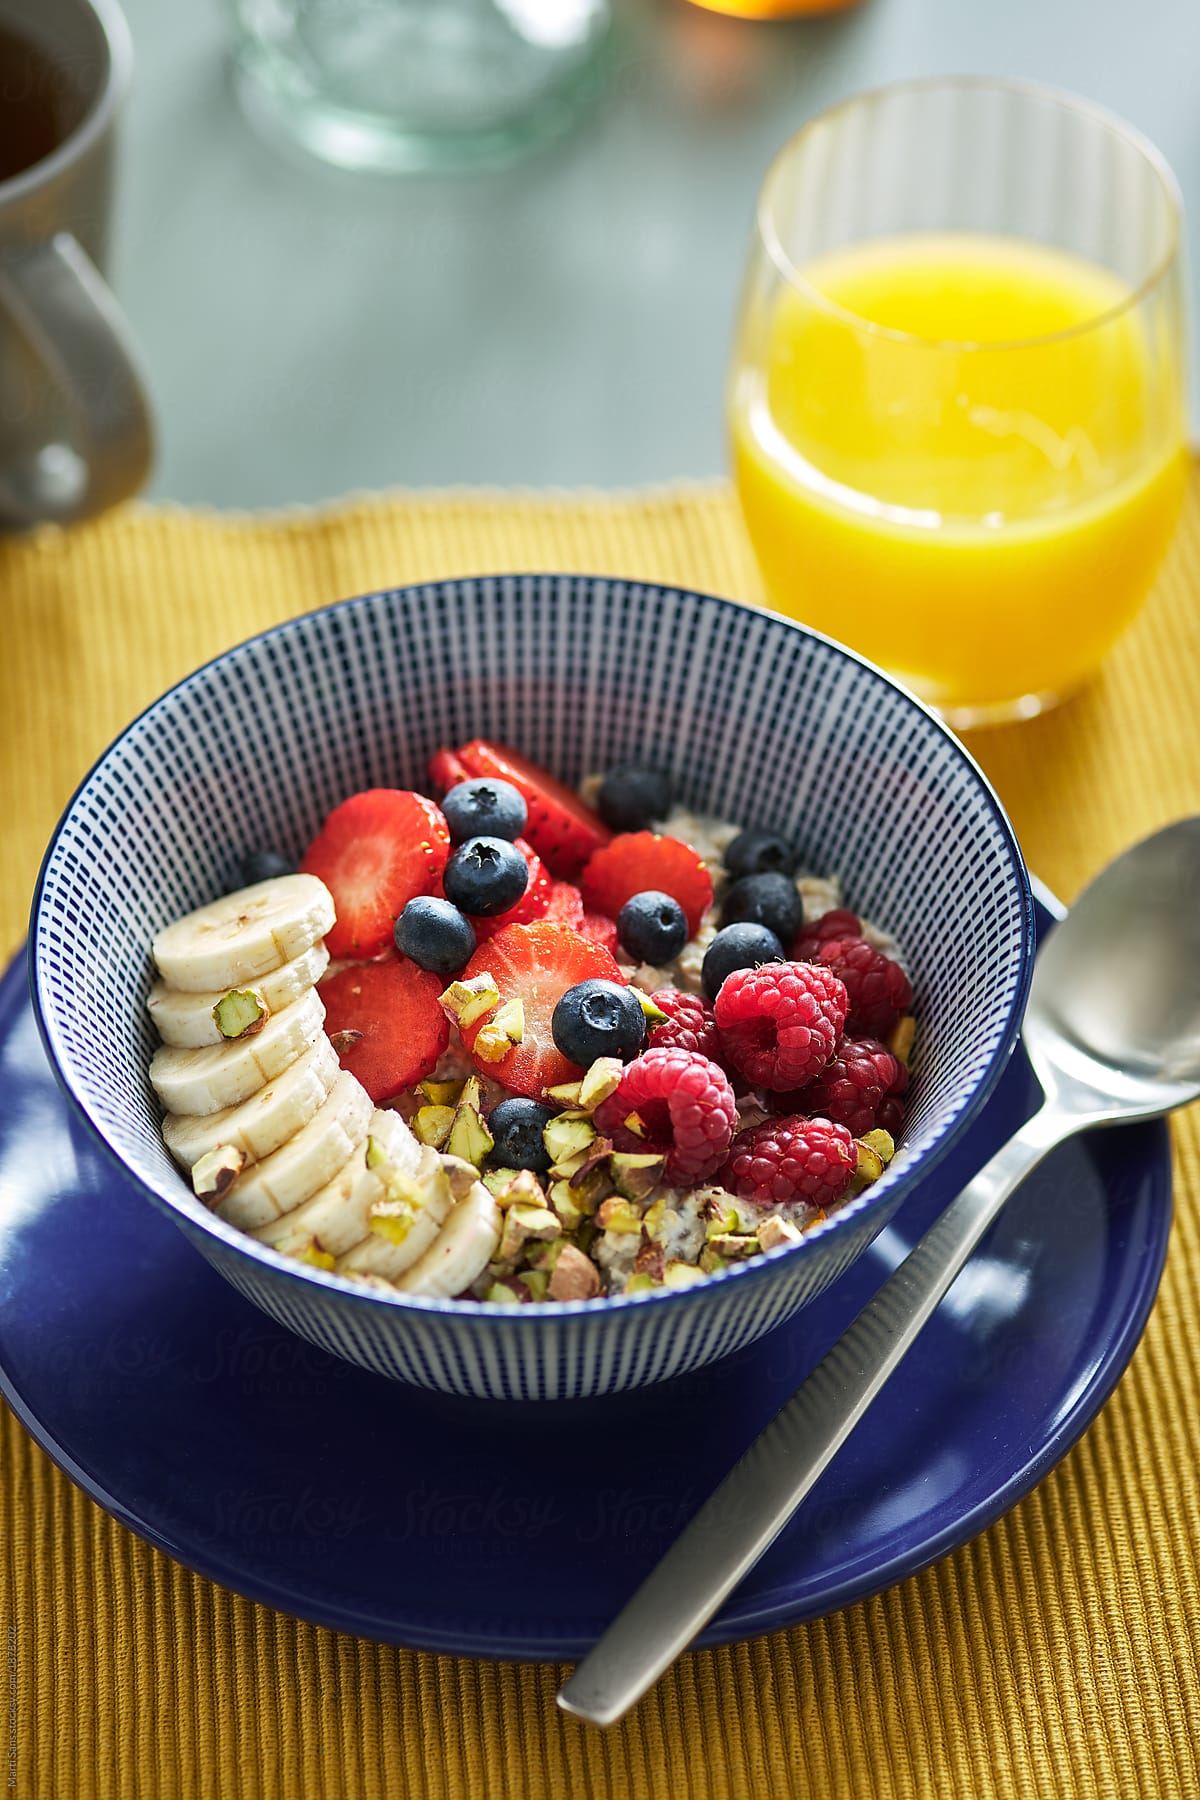 Delicious porridge with fruit and berries in bowl.